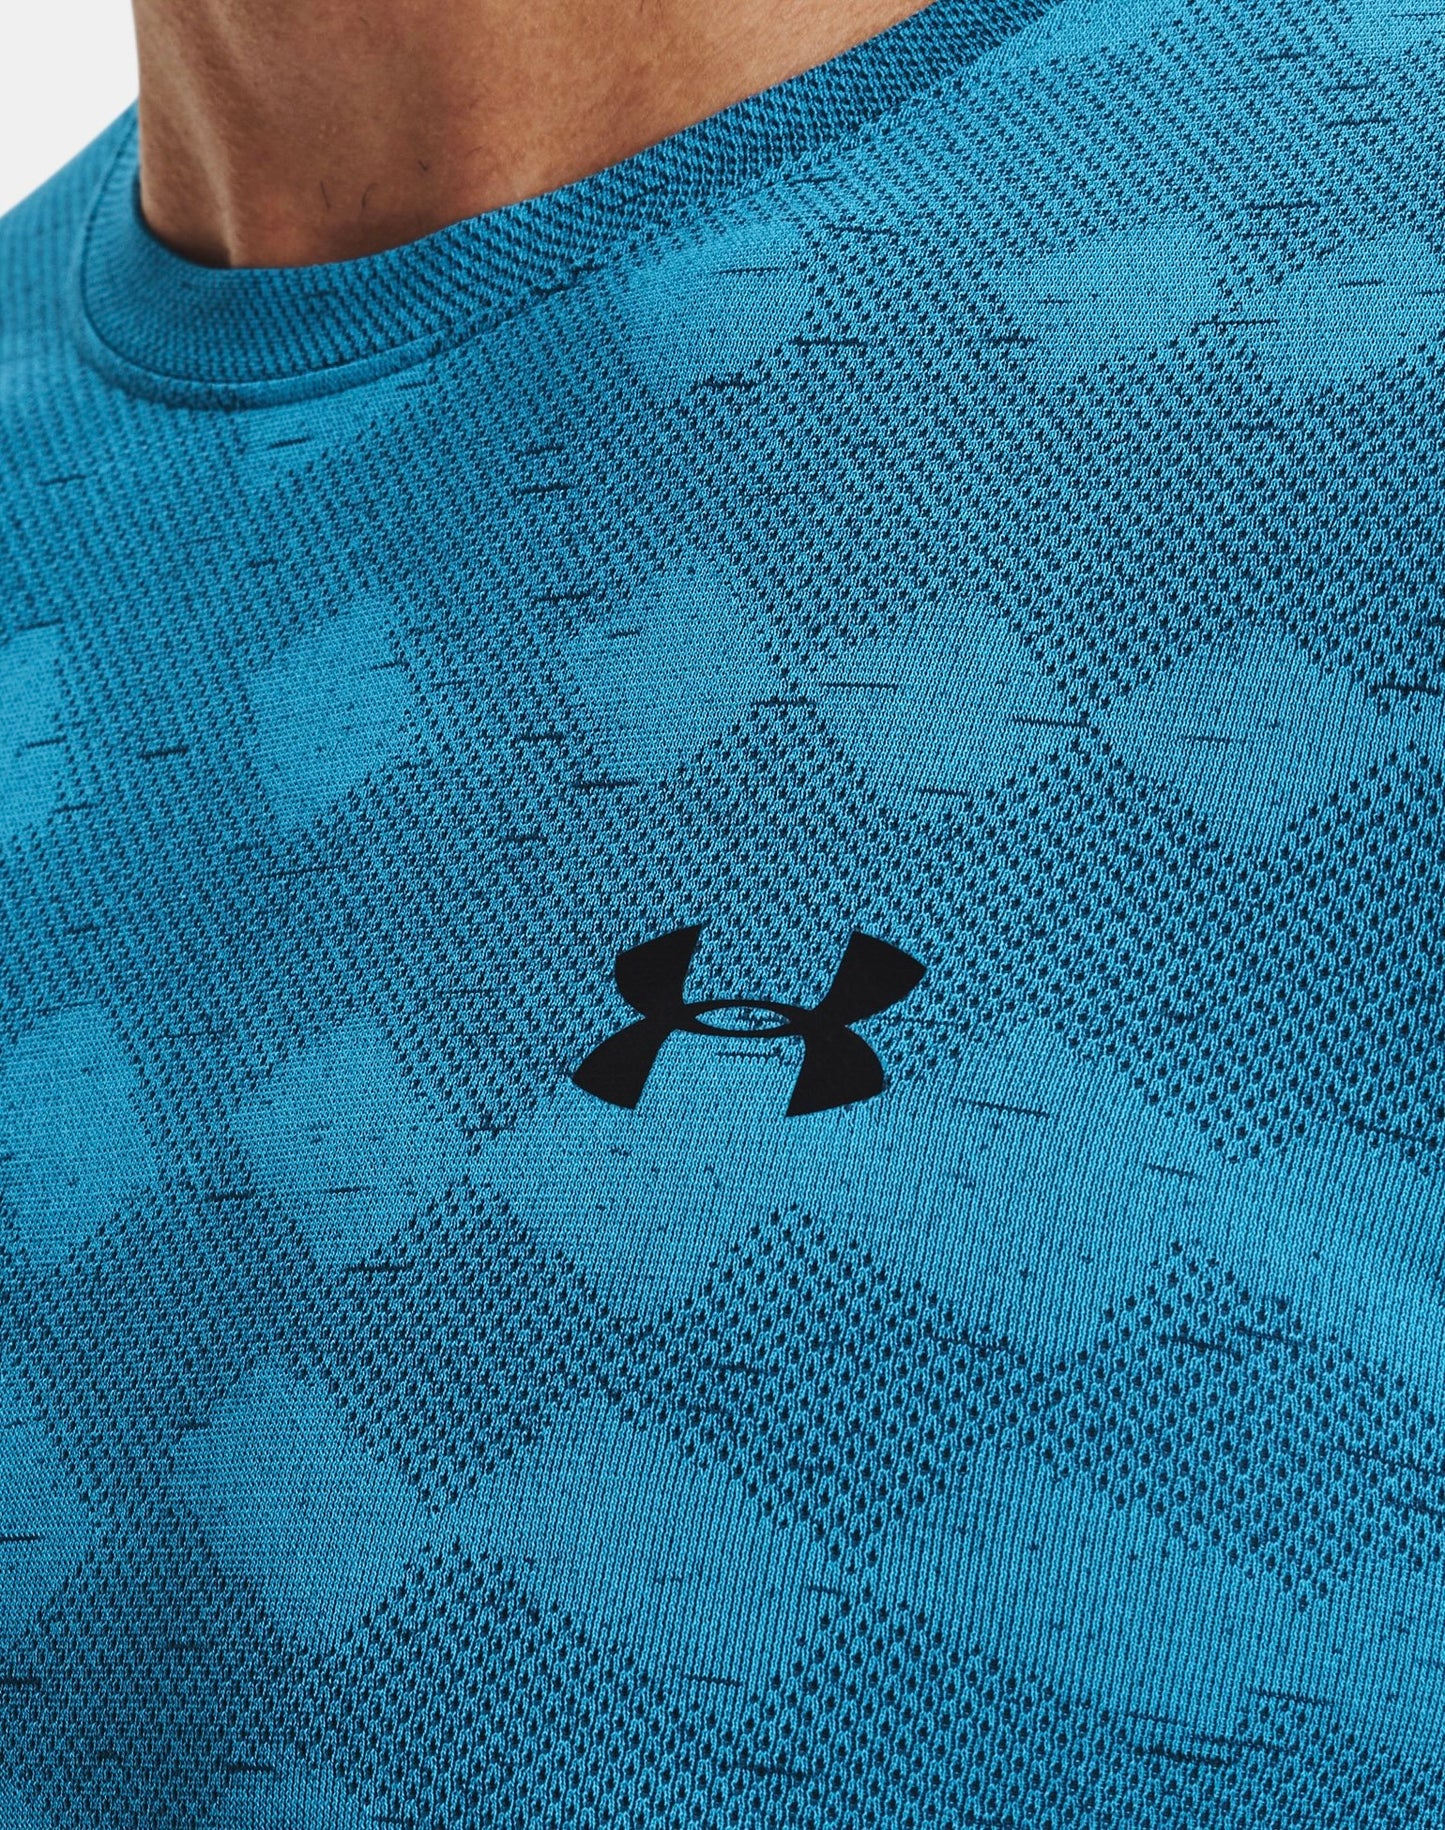 Under Armour Seamless Radial Blue T-Shirt